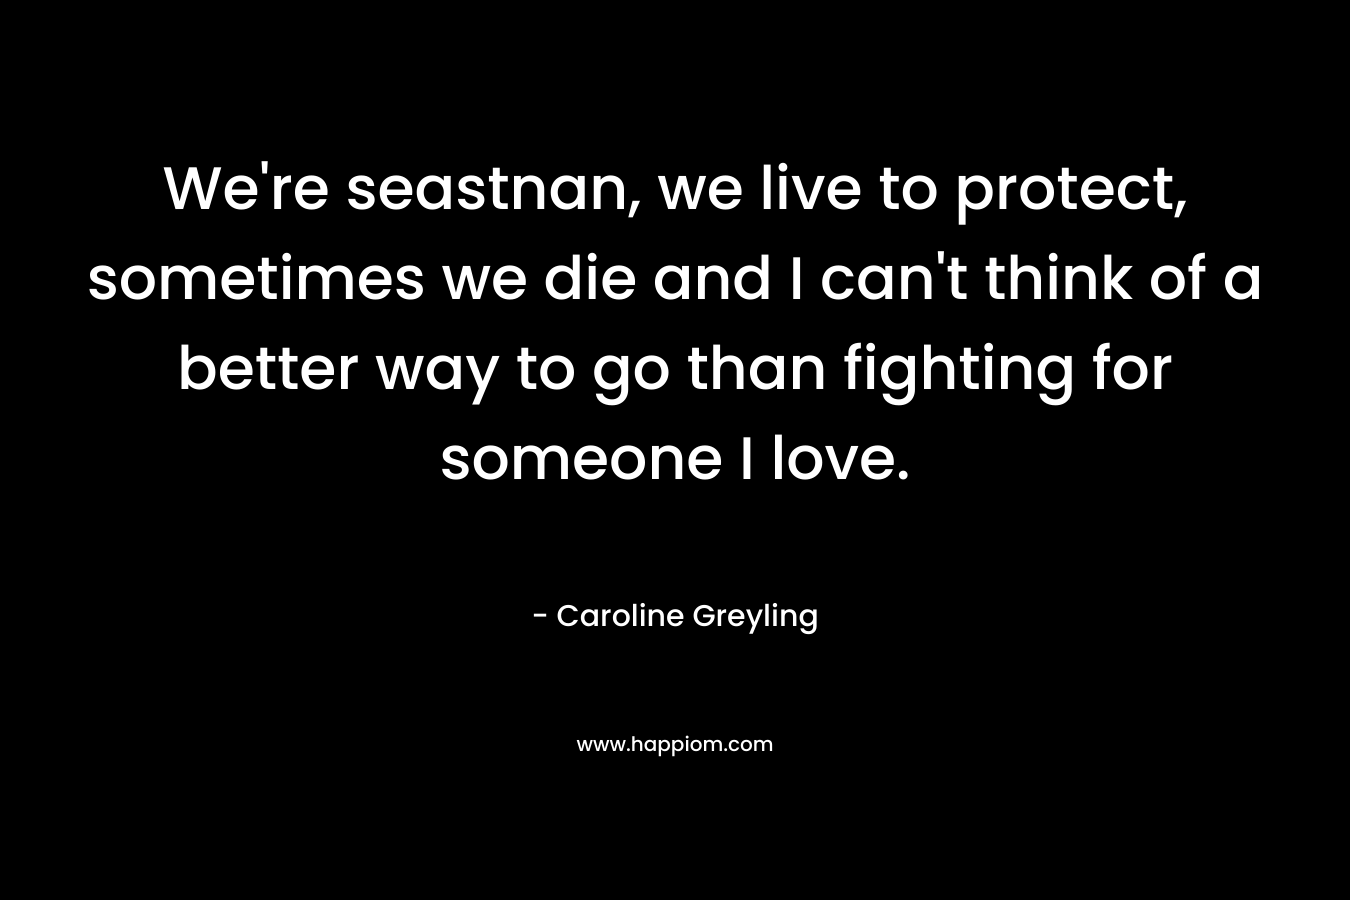 We're seastnan, we live to protect, sometimes we die and I can't think of a better way to go than fighting for someone I love.